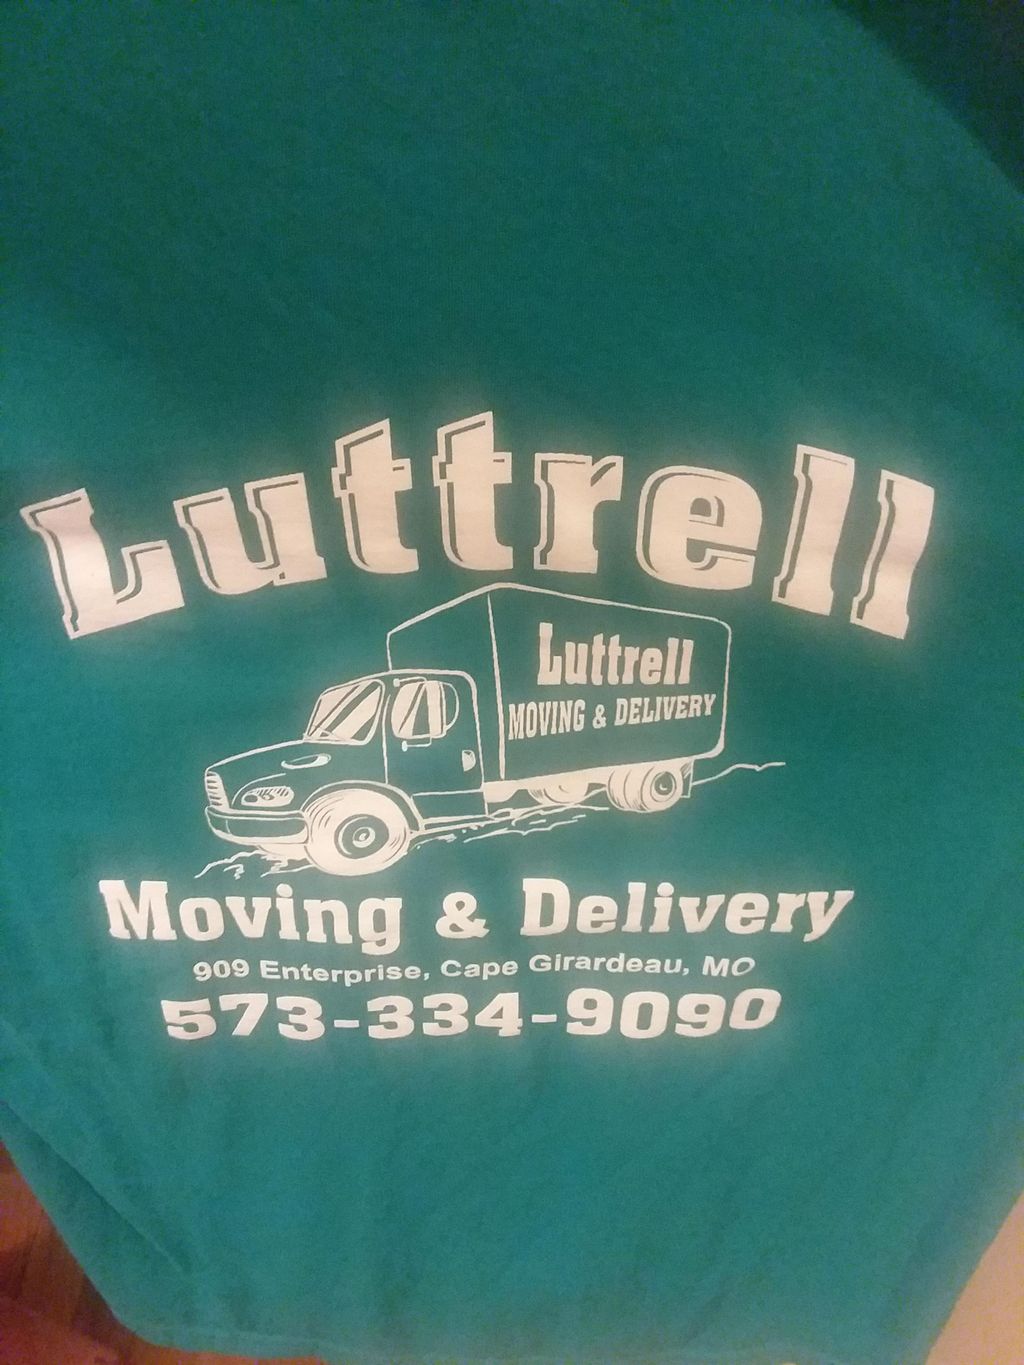 Luttrell moving & delivery